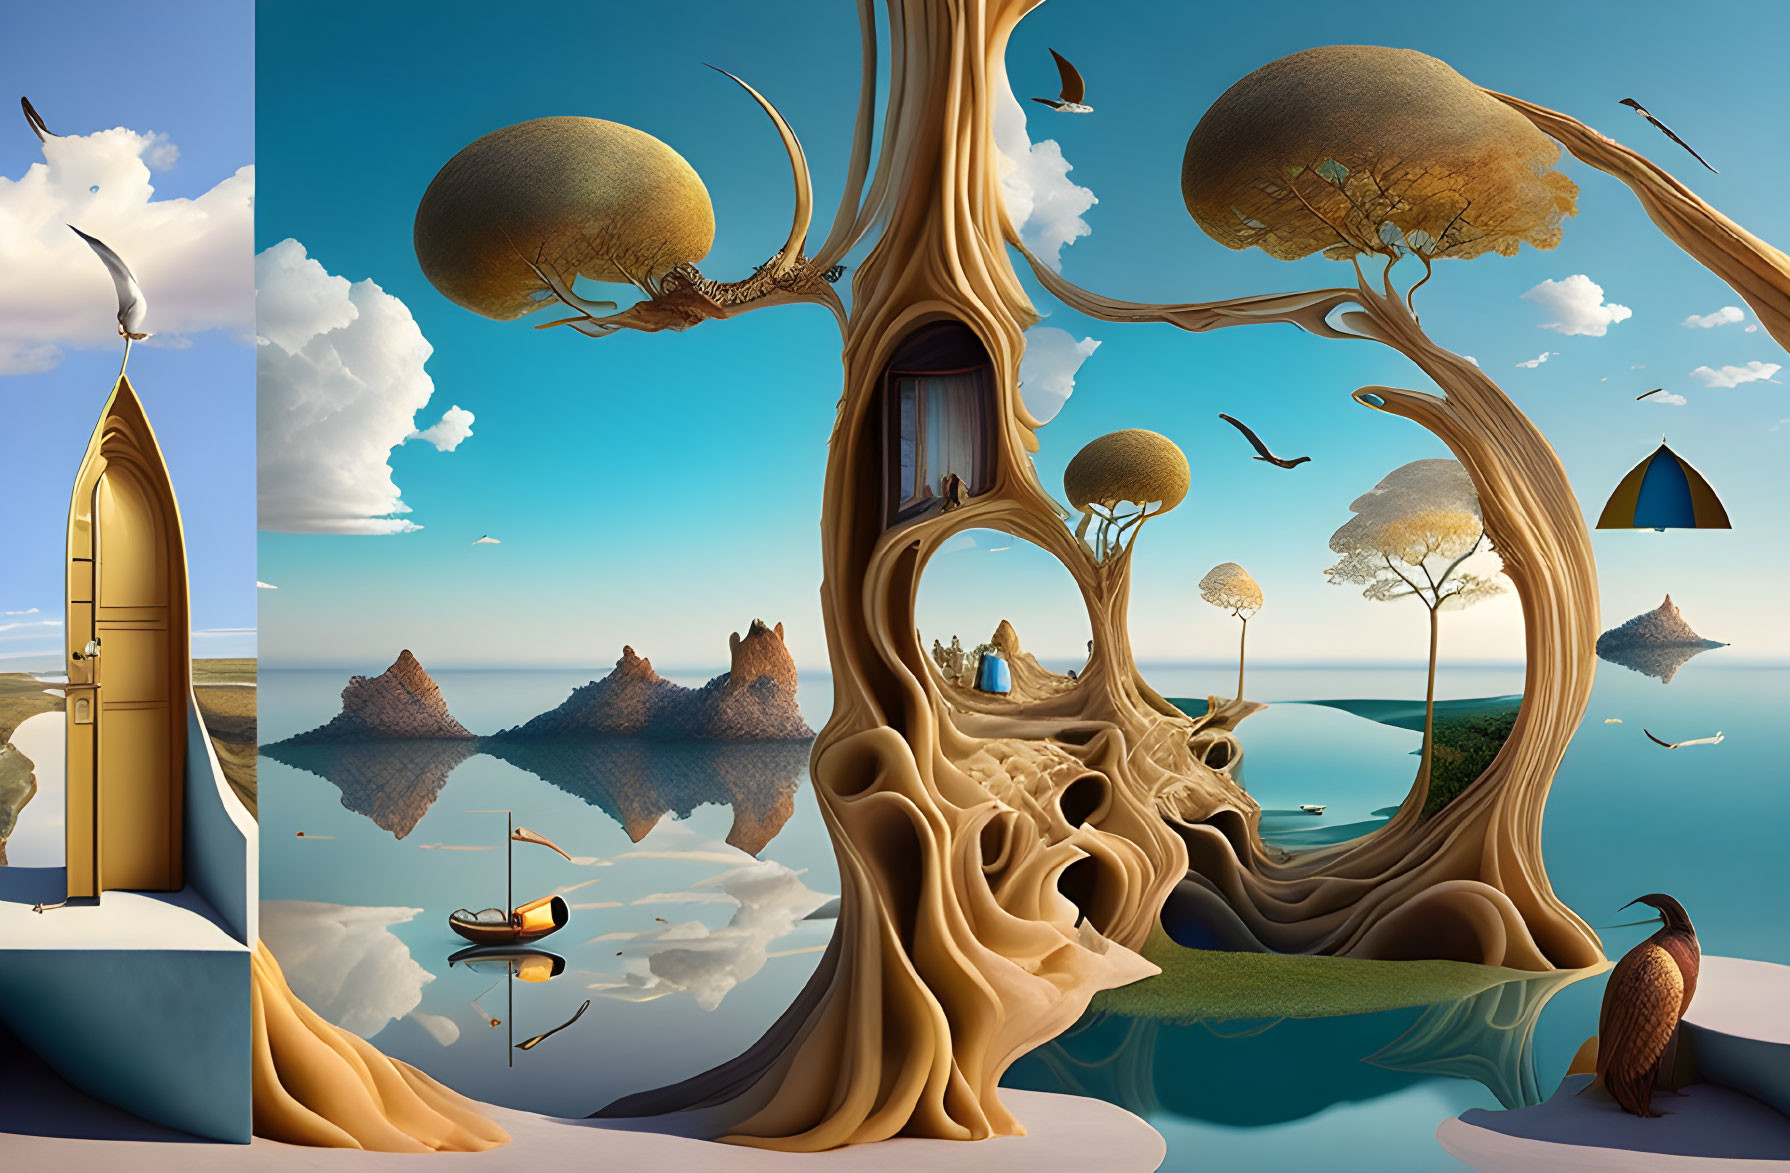 Surreal landscape with massive tree, floating islands, boat, and whimsical buildings